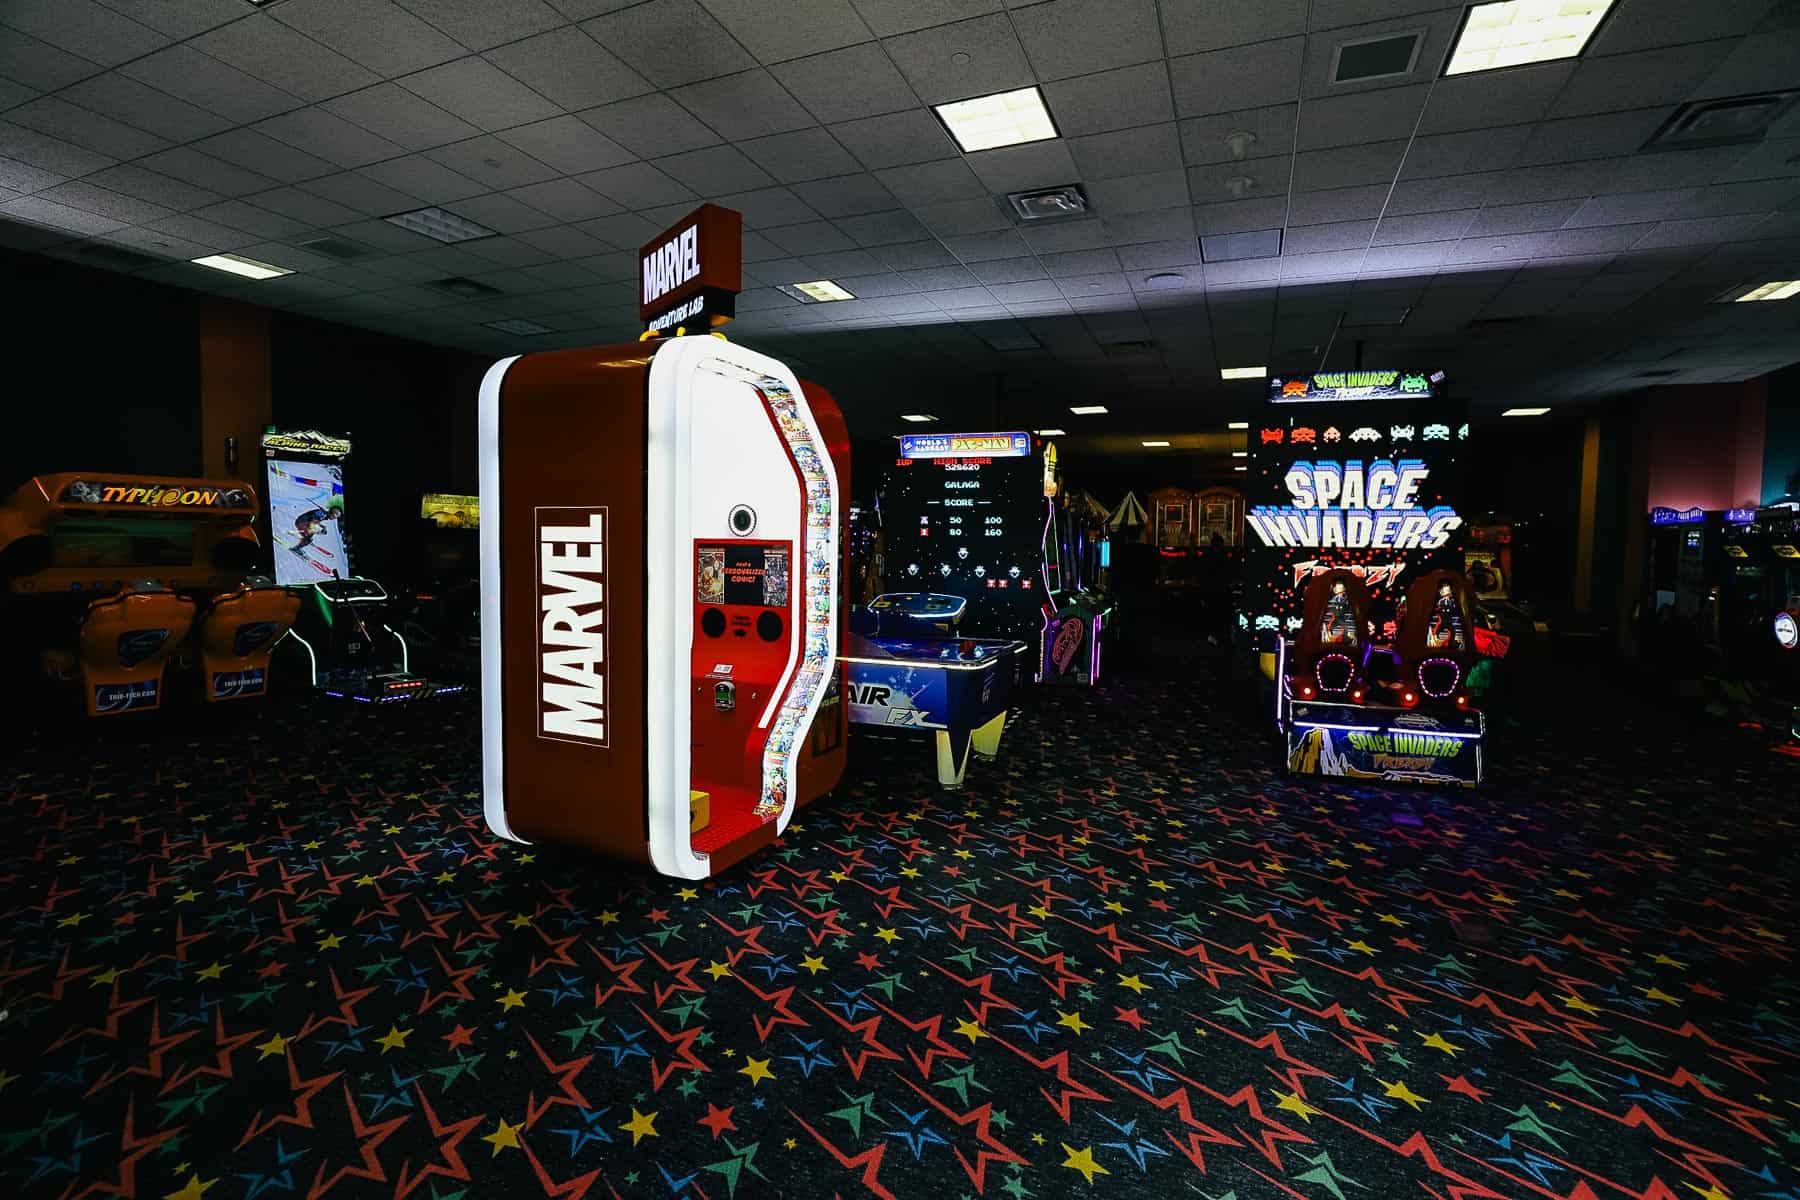 the interior of the arcade with various games 